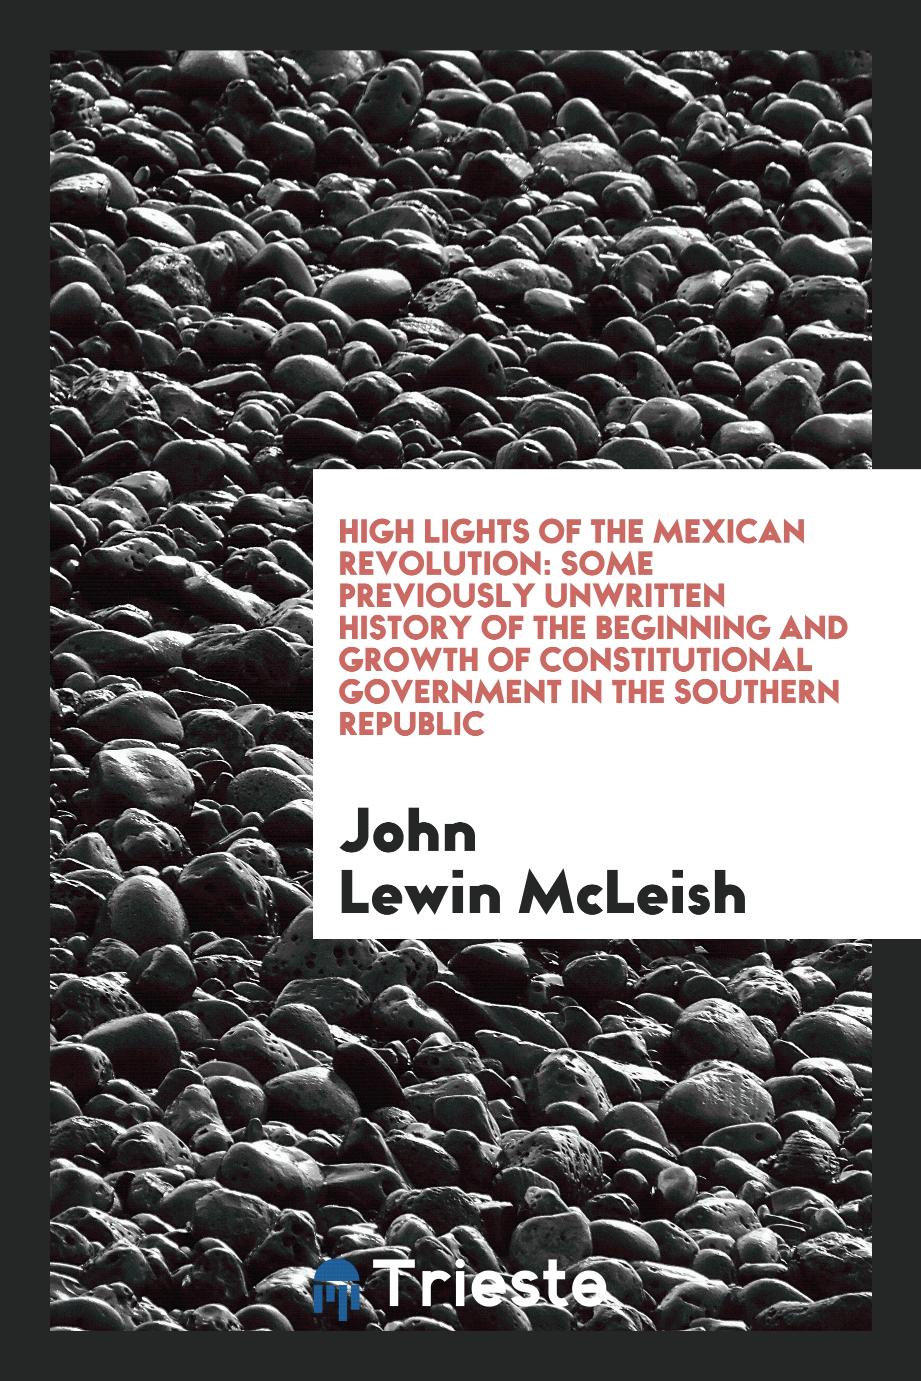 High lights of the Mexican revolution: some previously unwritten history of the beginning and growth of constitutional government in the southern republic